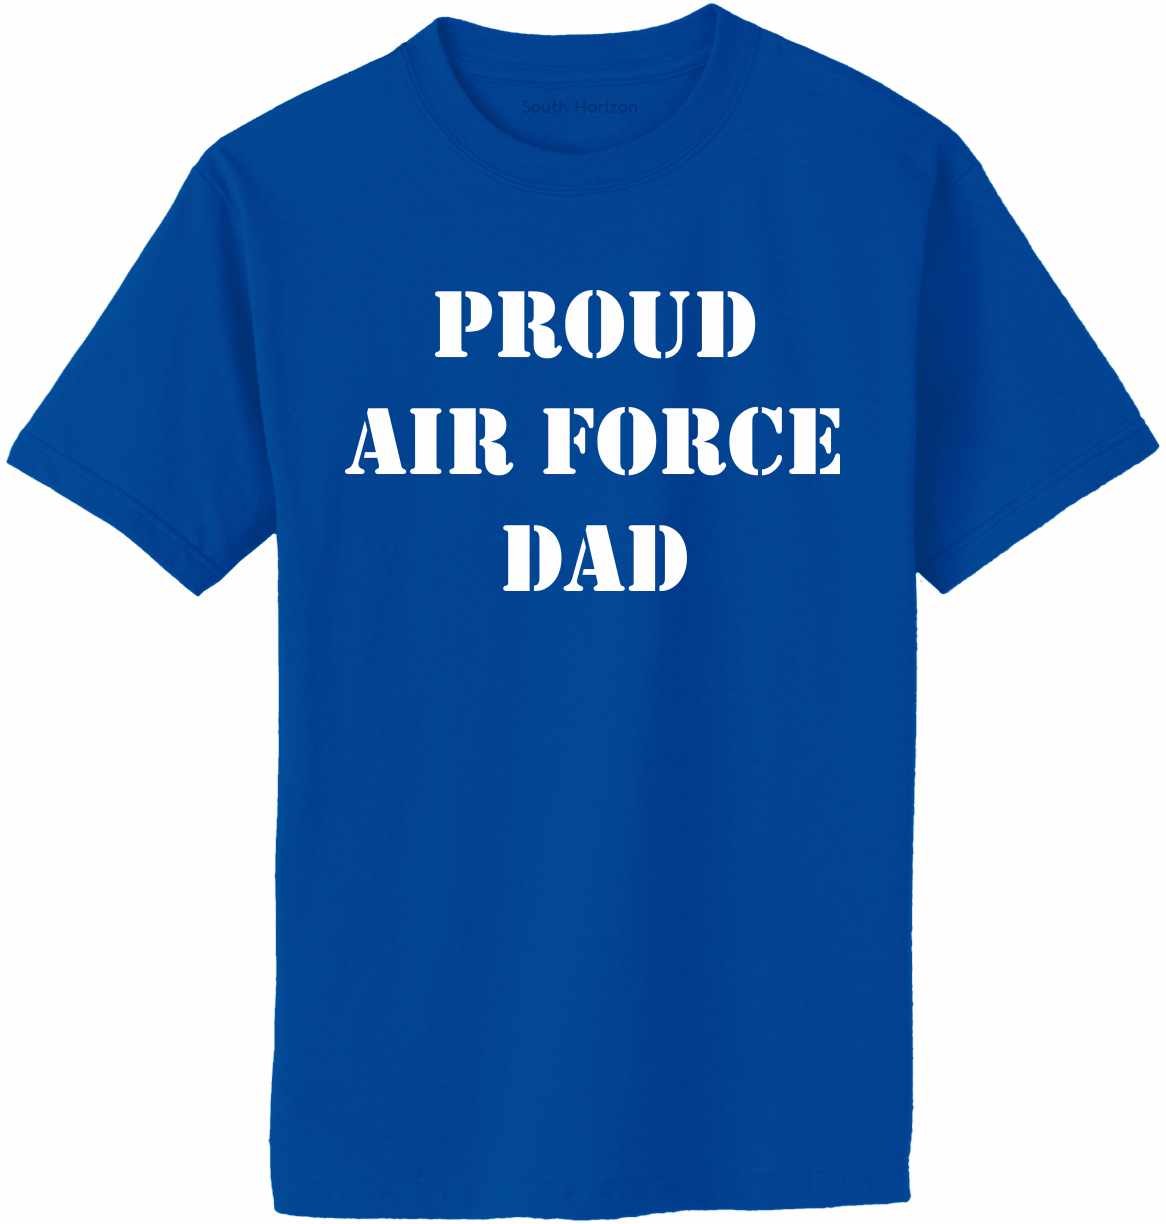 PROUD AIR FORCE DAD Adult T-Shirt